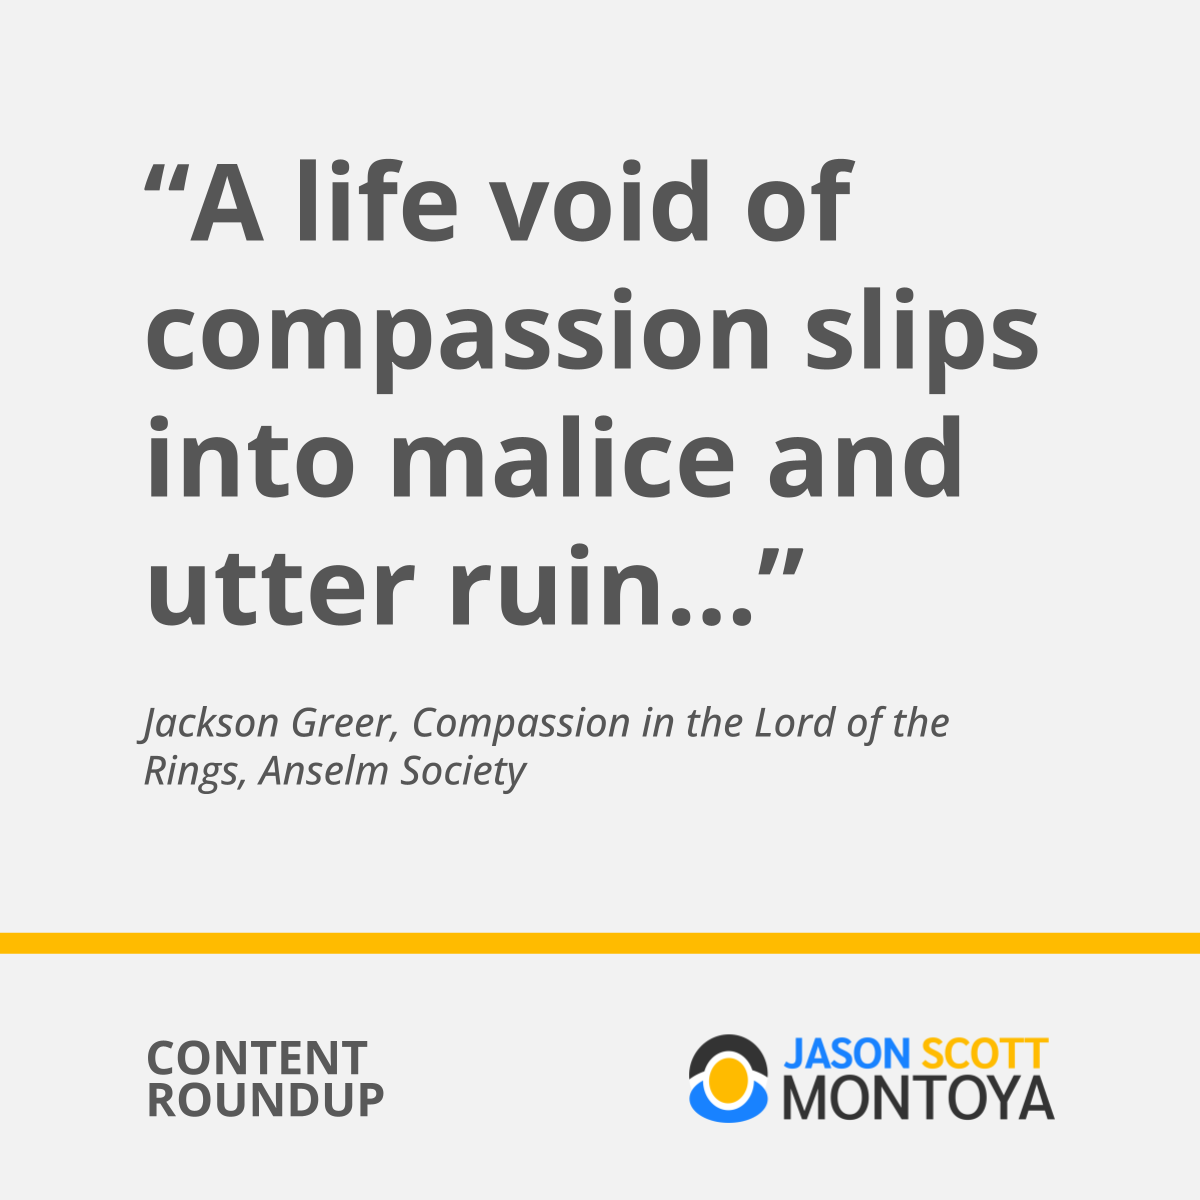 “A life void of compassion slips into malice and utter ruin…”  Jackson Greer, Compassion in the Lord of the Rings, Anselm Society